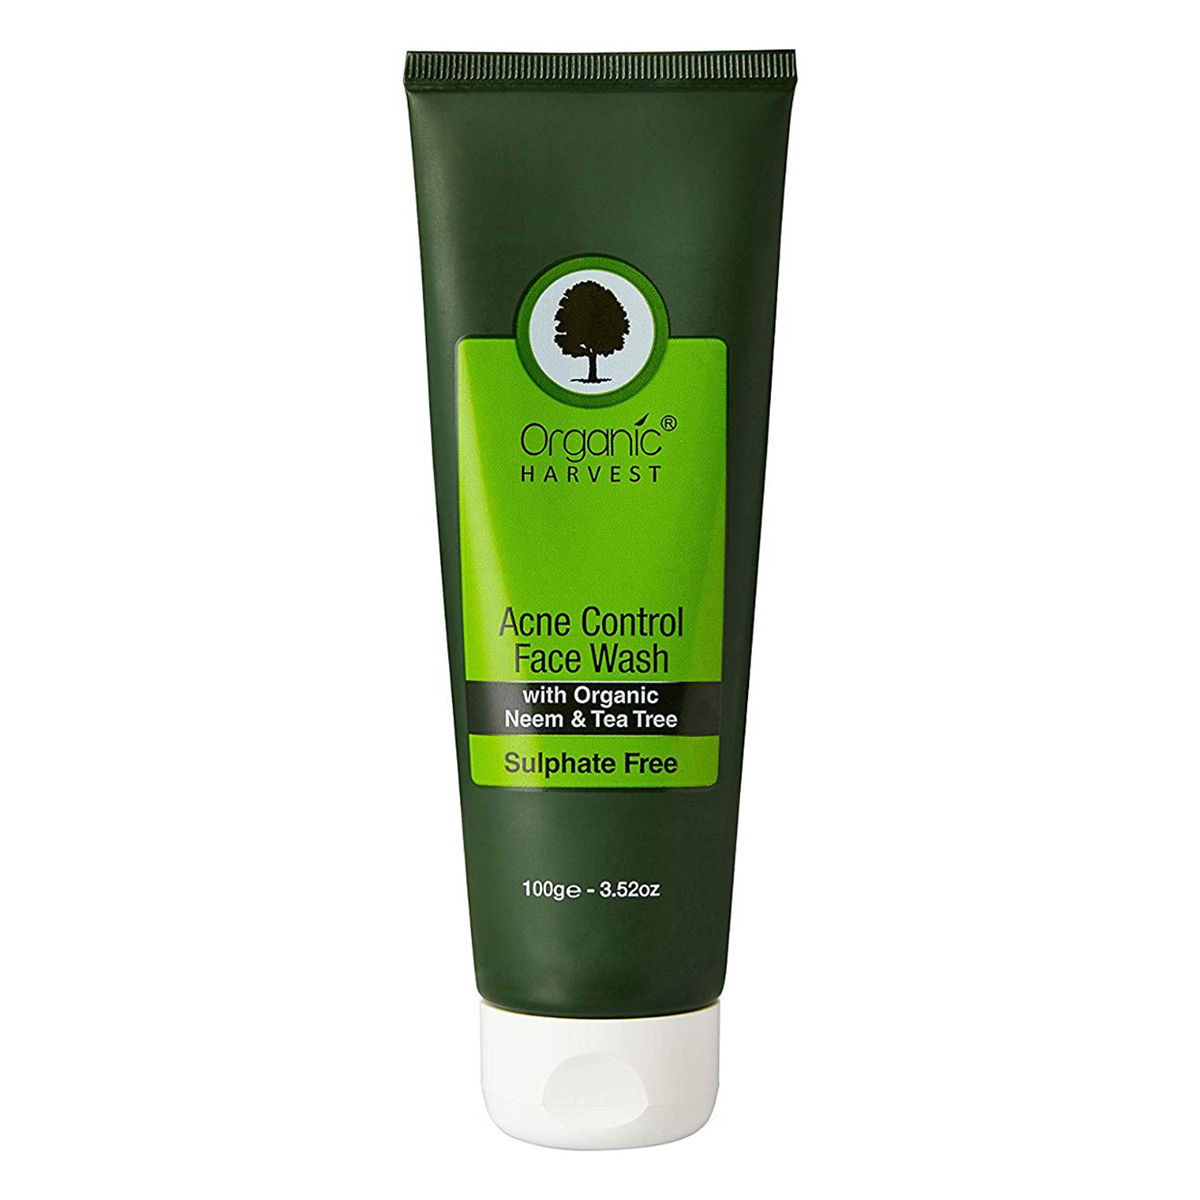 Buy Organic Harvest Acne Control Face Wash, 100 gm Online